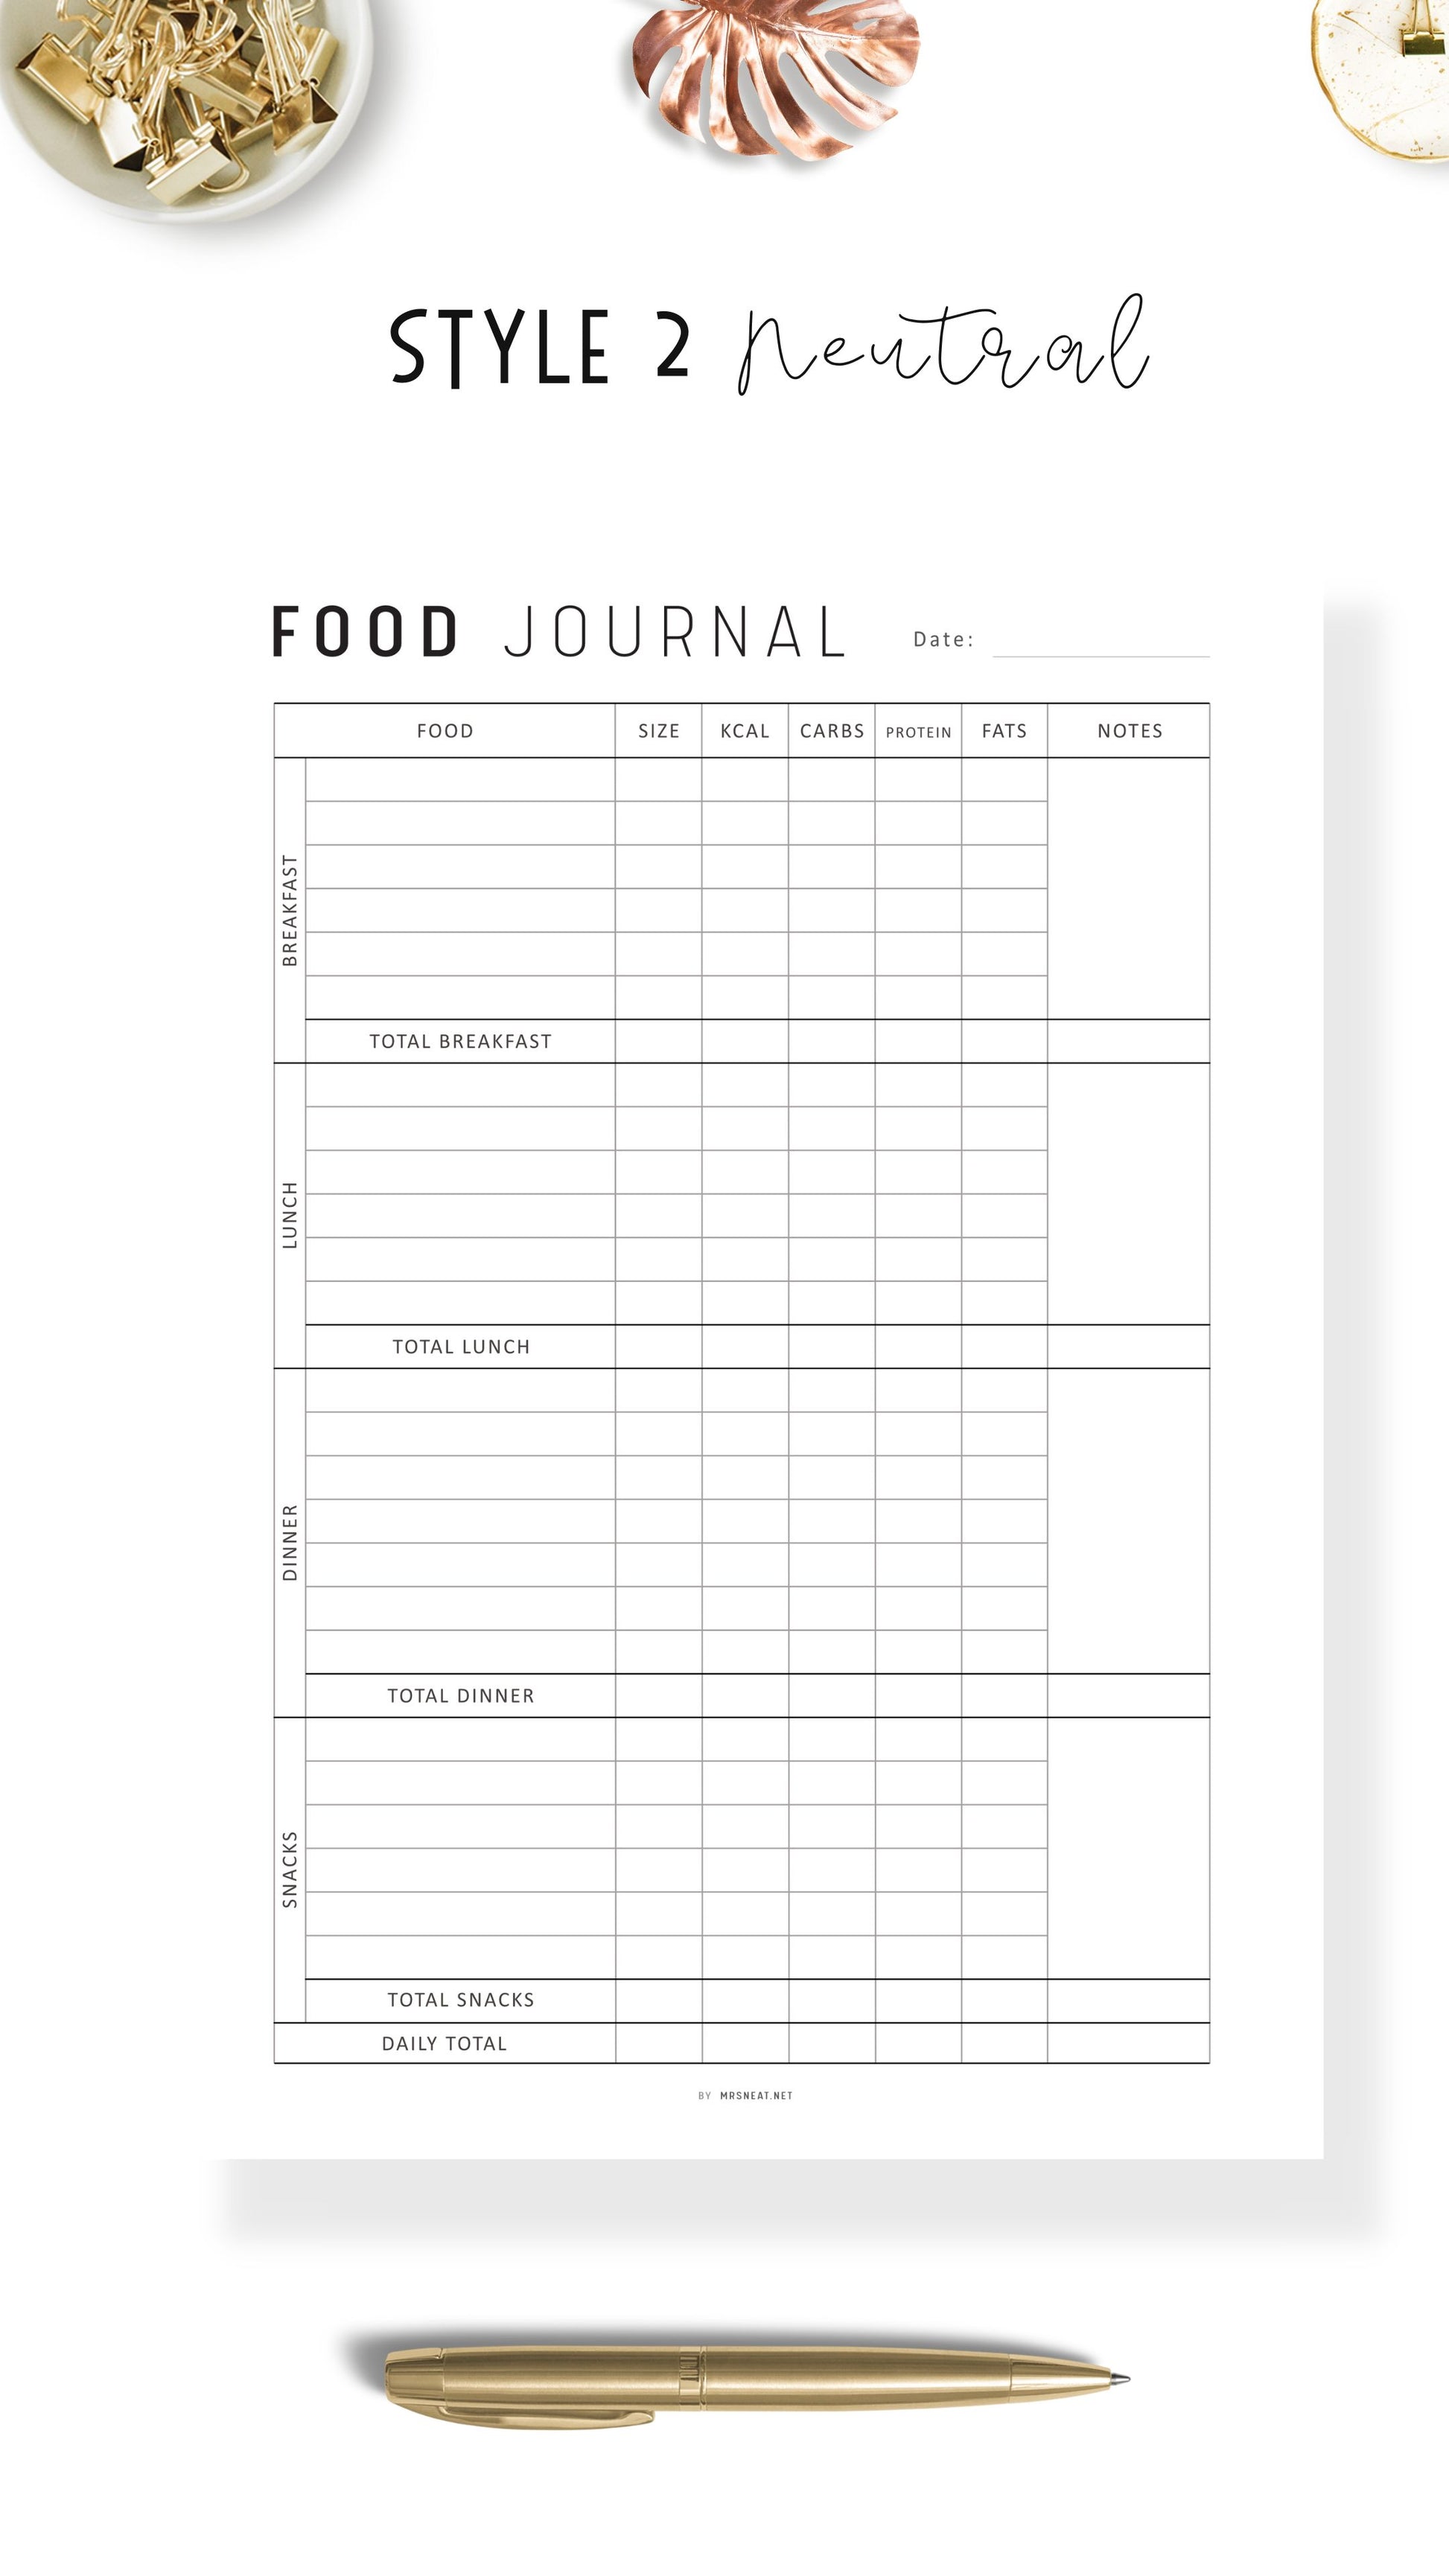 Minimalist Daily Calorie Tracker Template Printable, Calorie Counter PDF, My Food Diary, Digital Daily Food Journal, A4, A5, Letter, Half Letter, Colorful Page